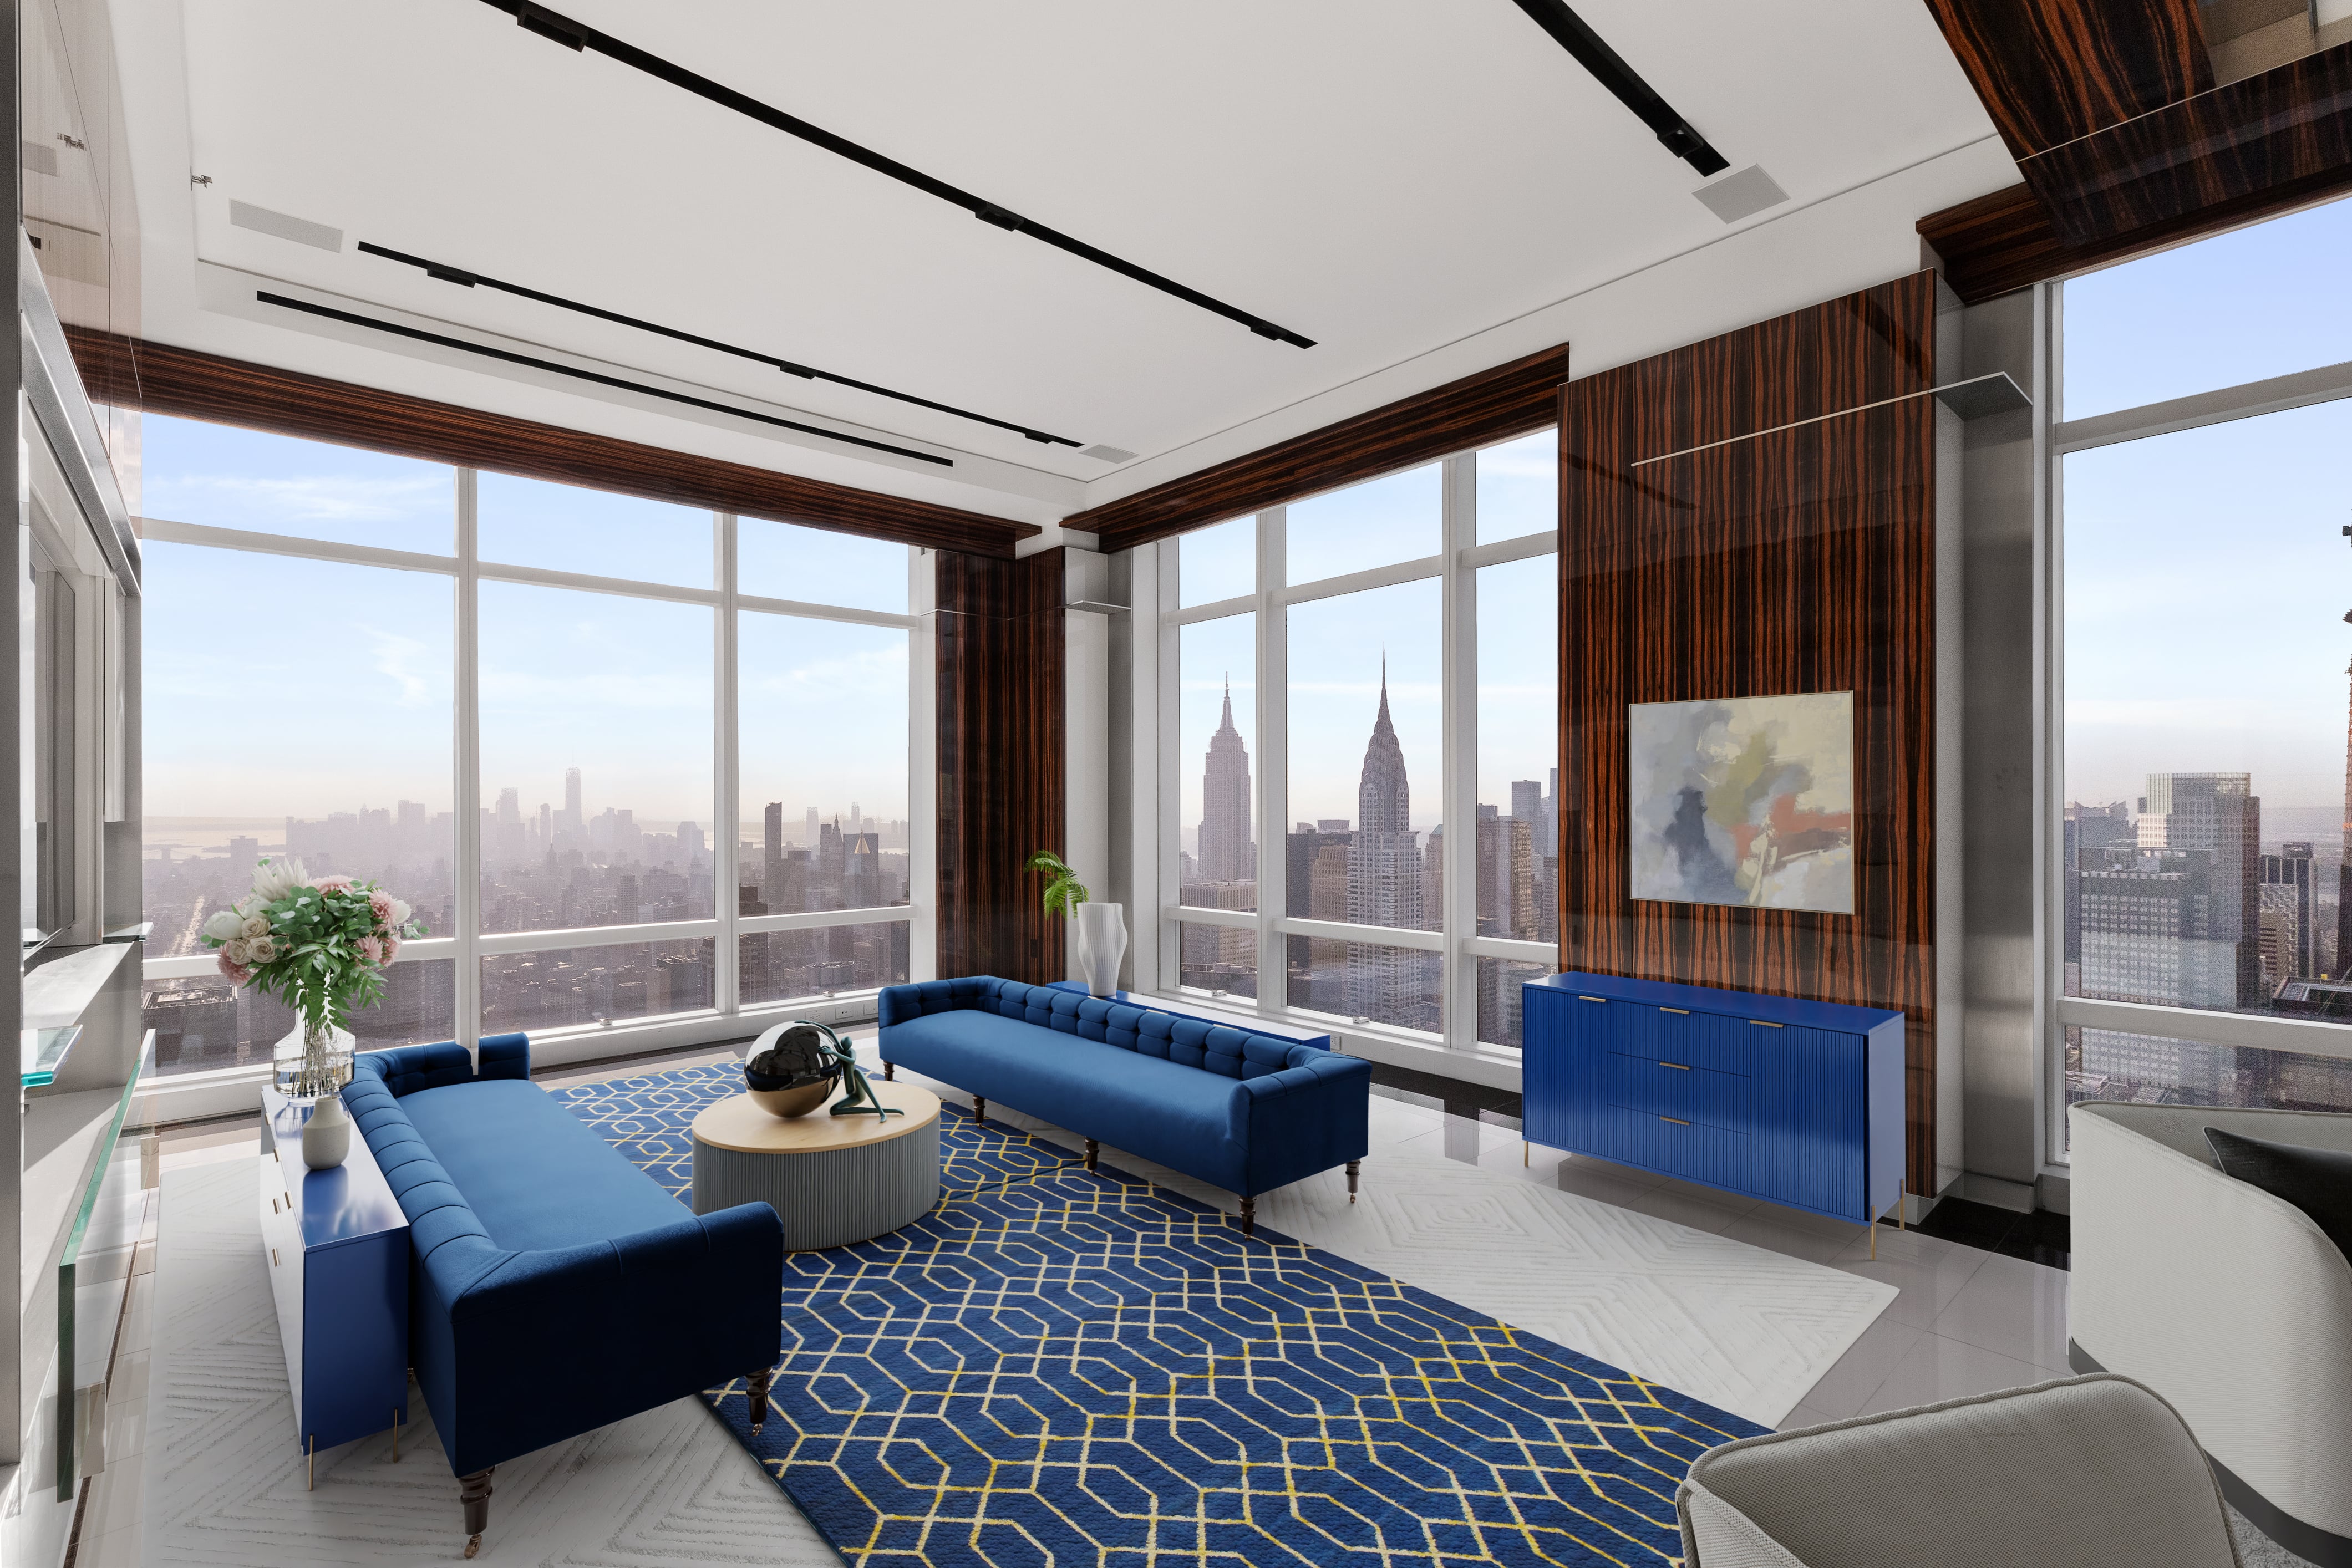 845 United Nations Plaza 82-Cd, Turtle Bay, Midtown East, NYC - 3 Bedrooms  
2.5 Bathrooms  
8 Rooms - 